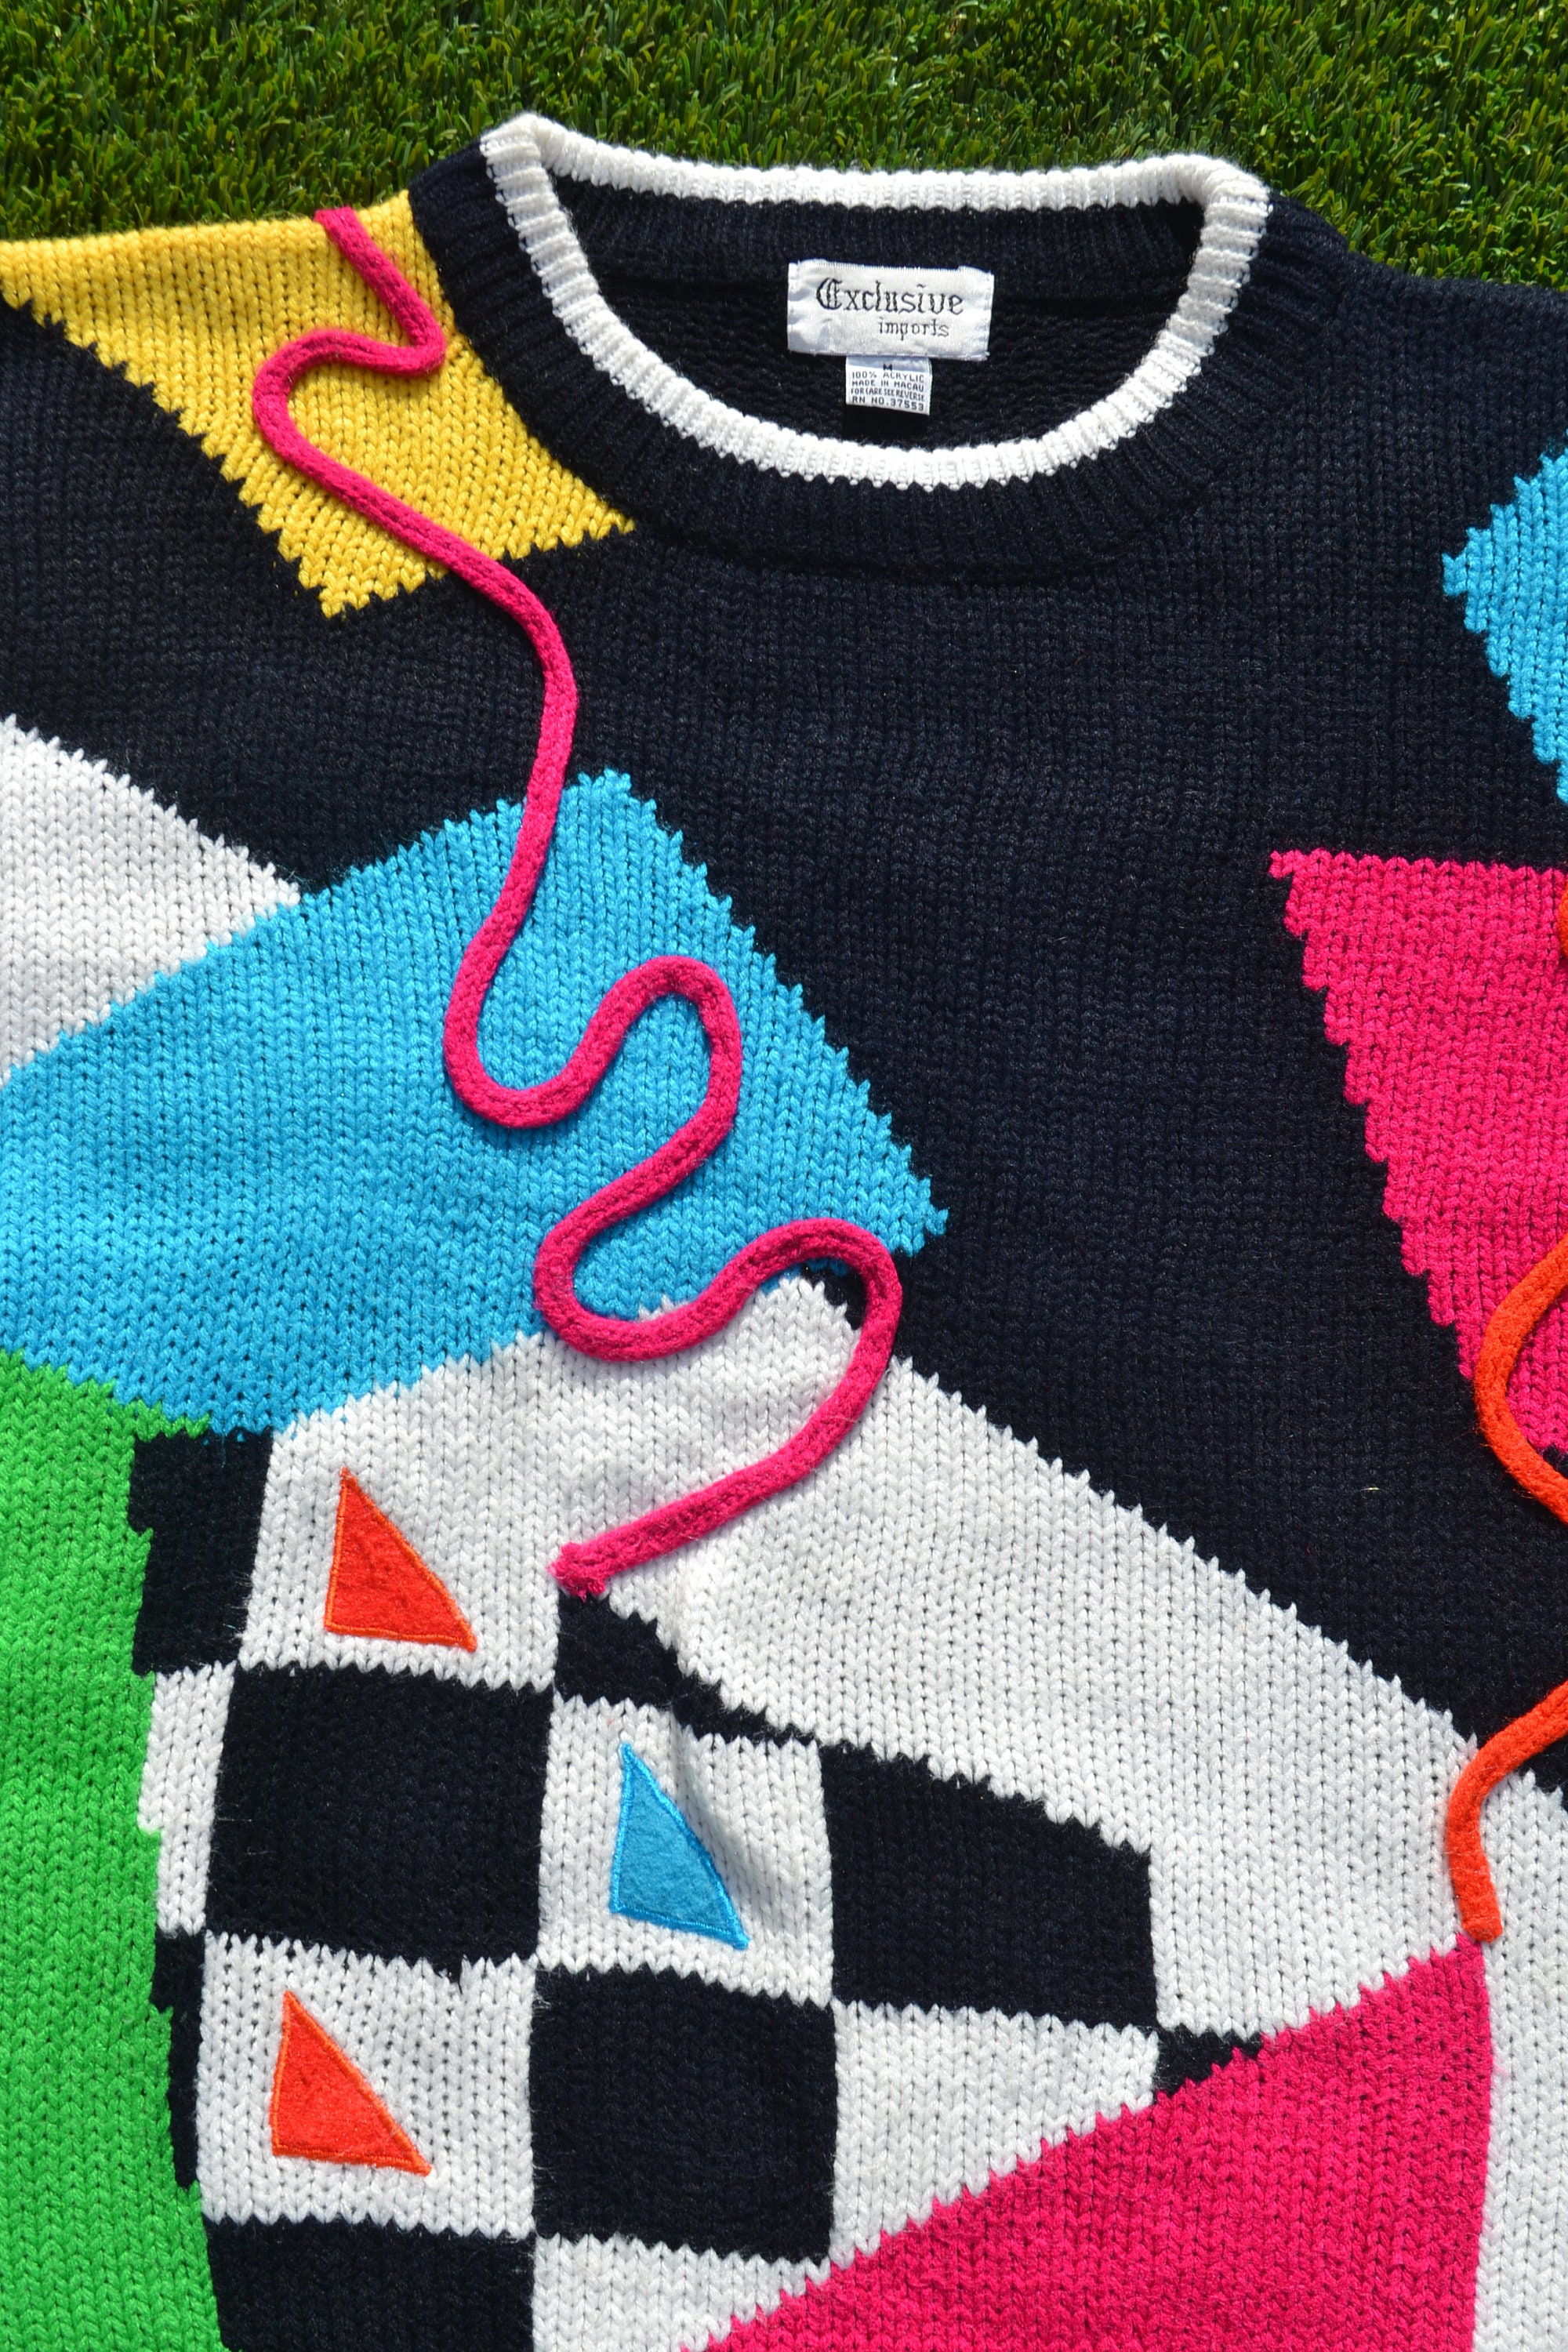 VINTAGE 80s UGLY JUMPER 80s Rainbow Abstract Woolen Knit 80s - Etsy Canada